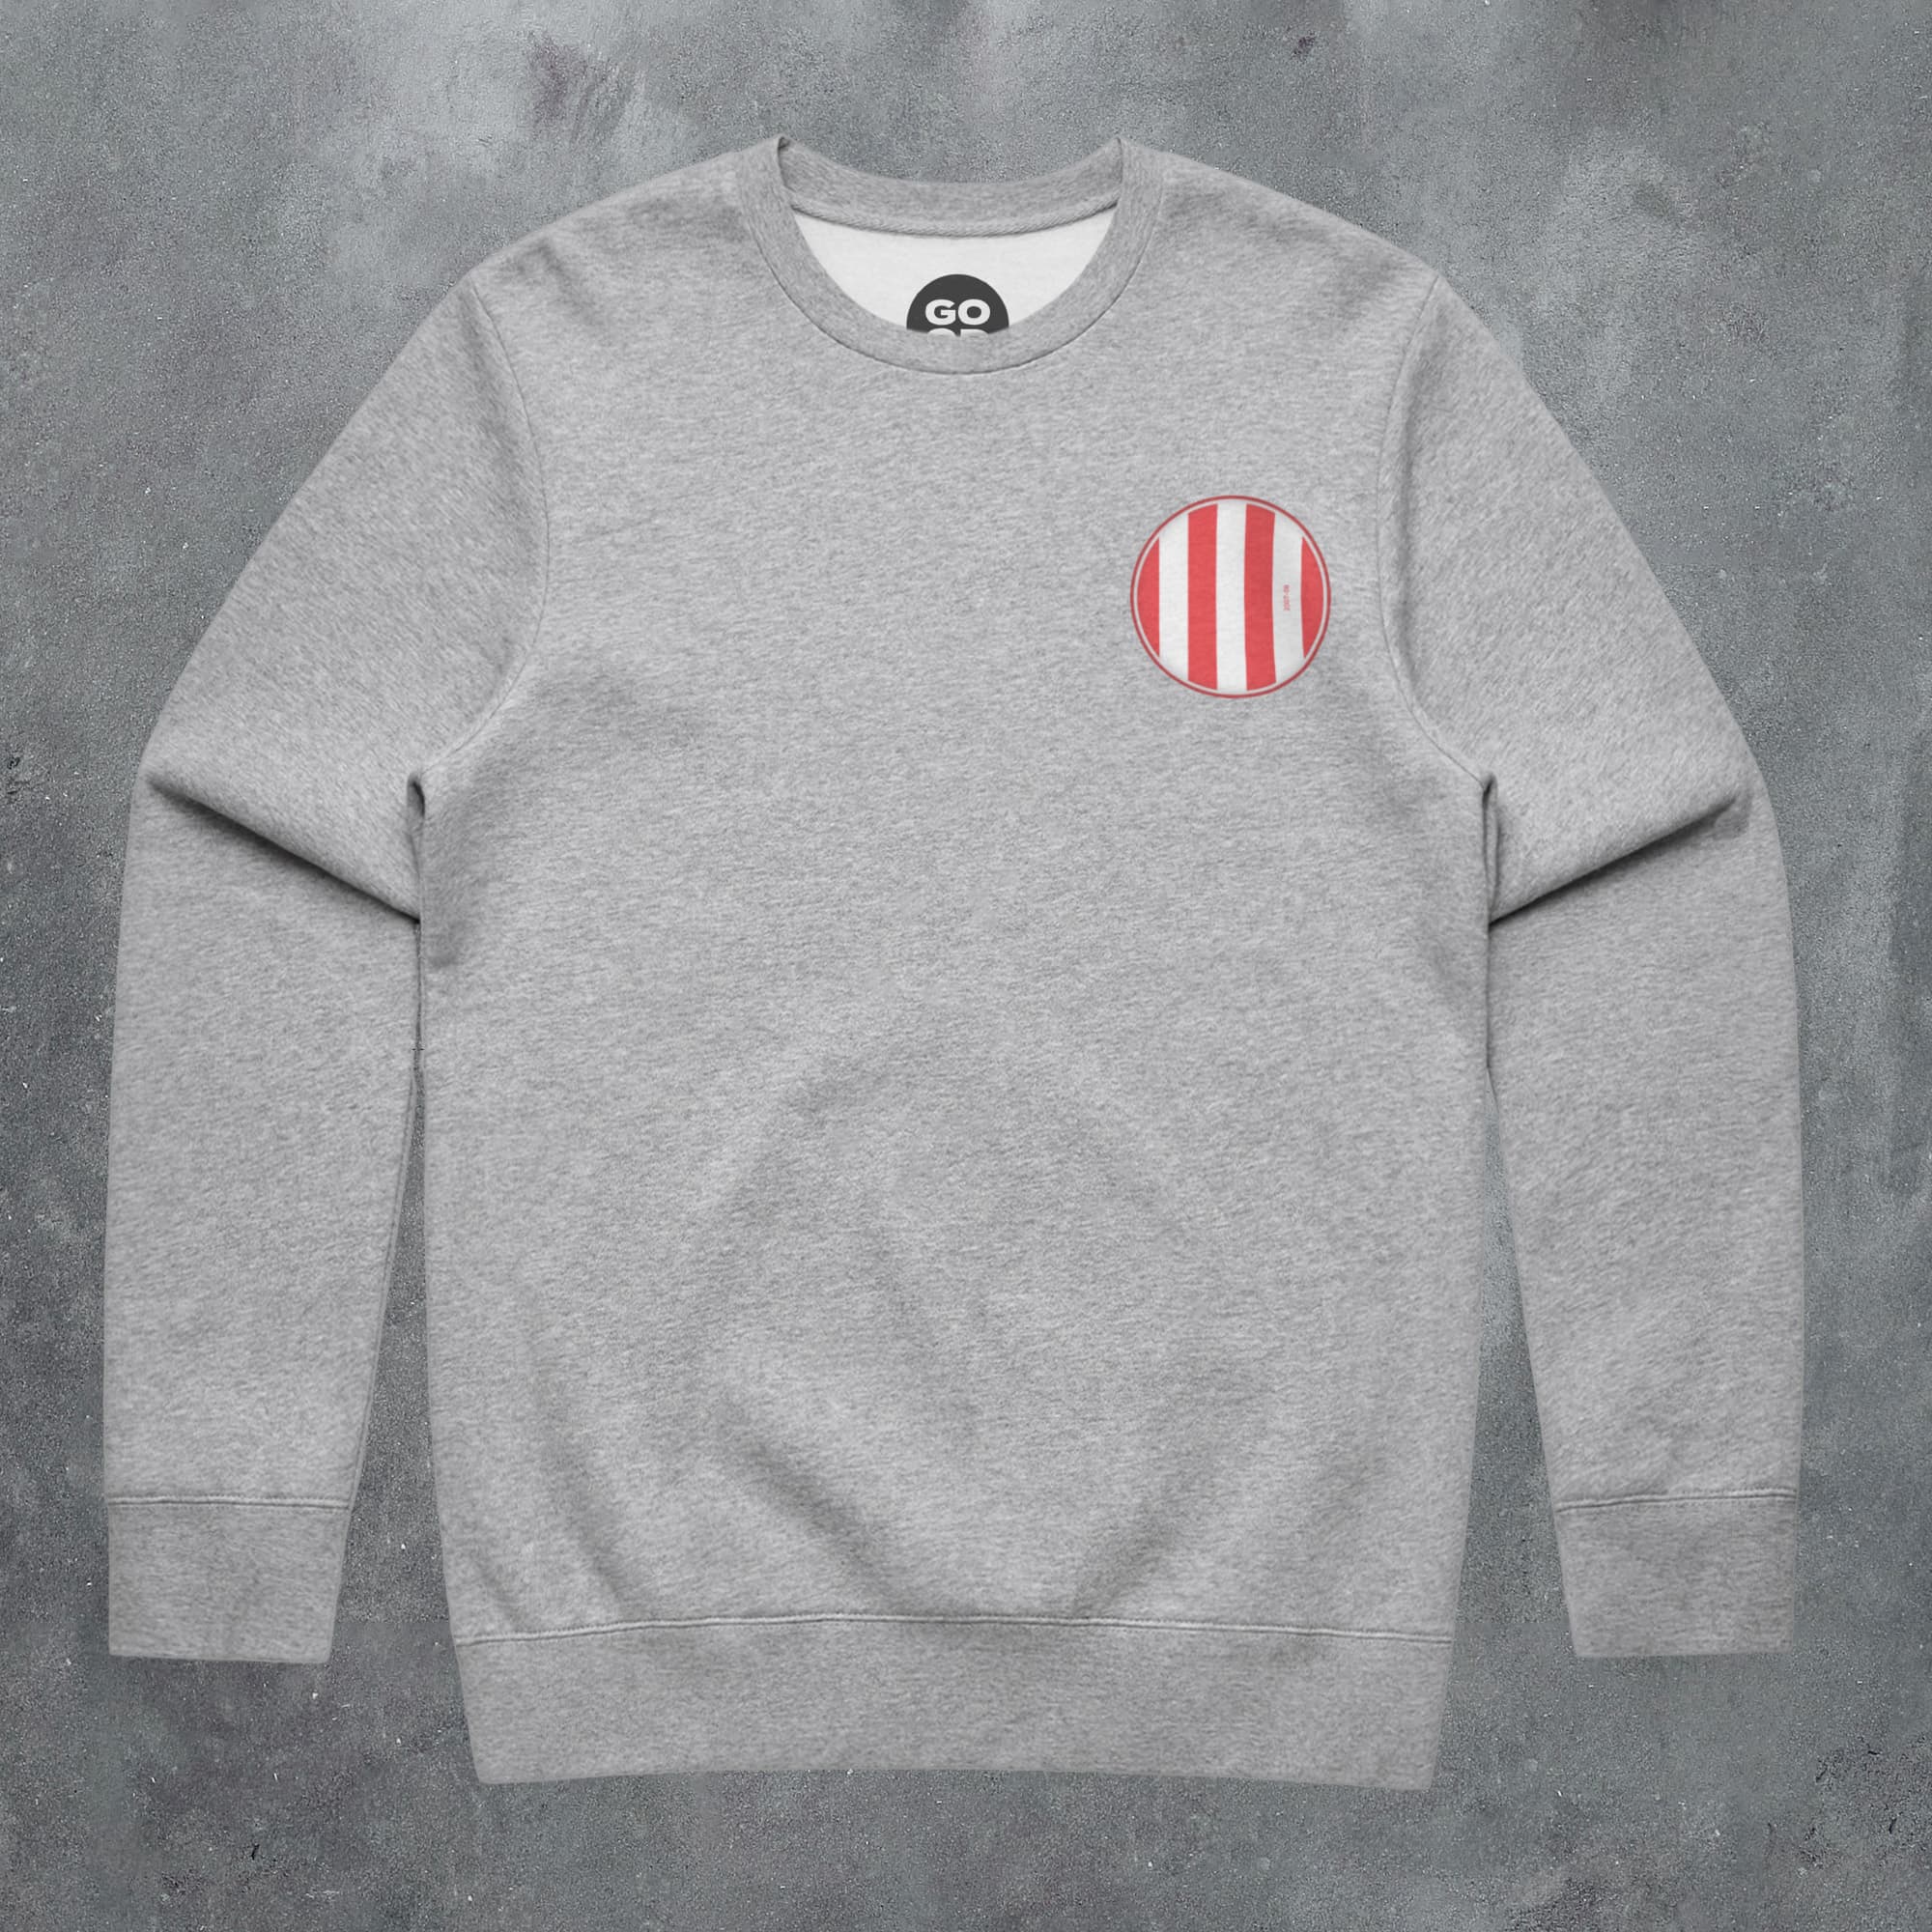 a grey sweatshirt with a red and white striped pocket